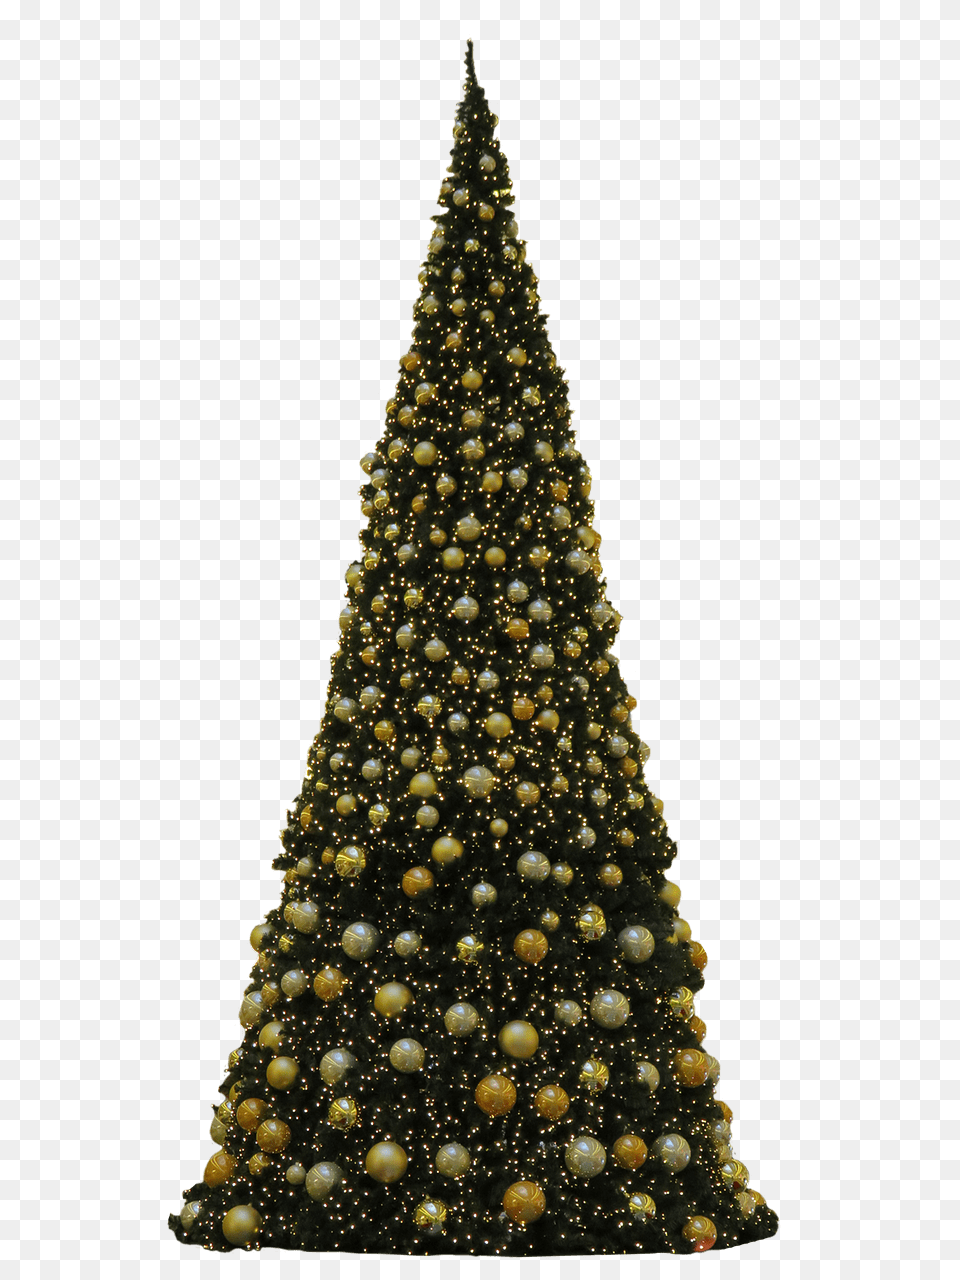 Christmas Tree Golden Baubles, Christmas Decorations, Festival, Plant, Christmas Tree Png Image